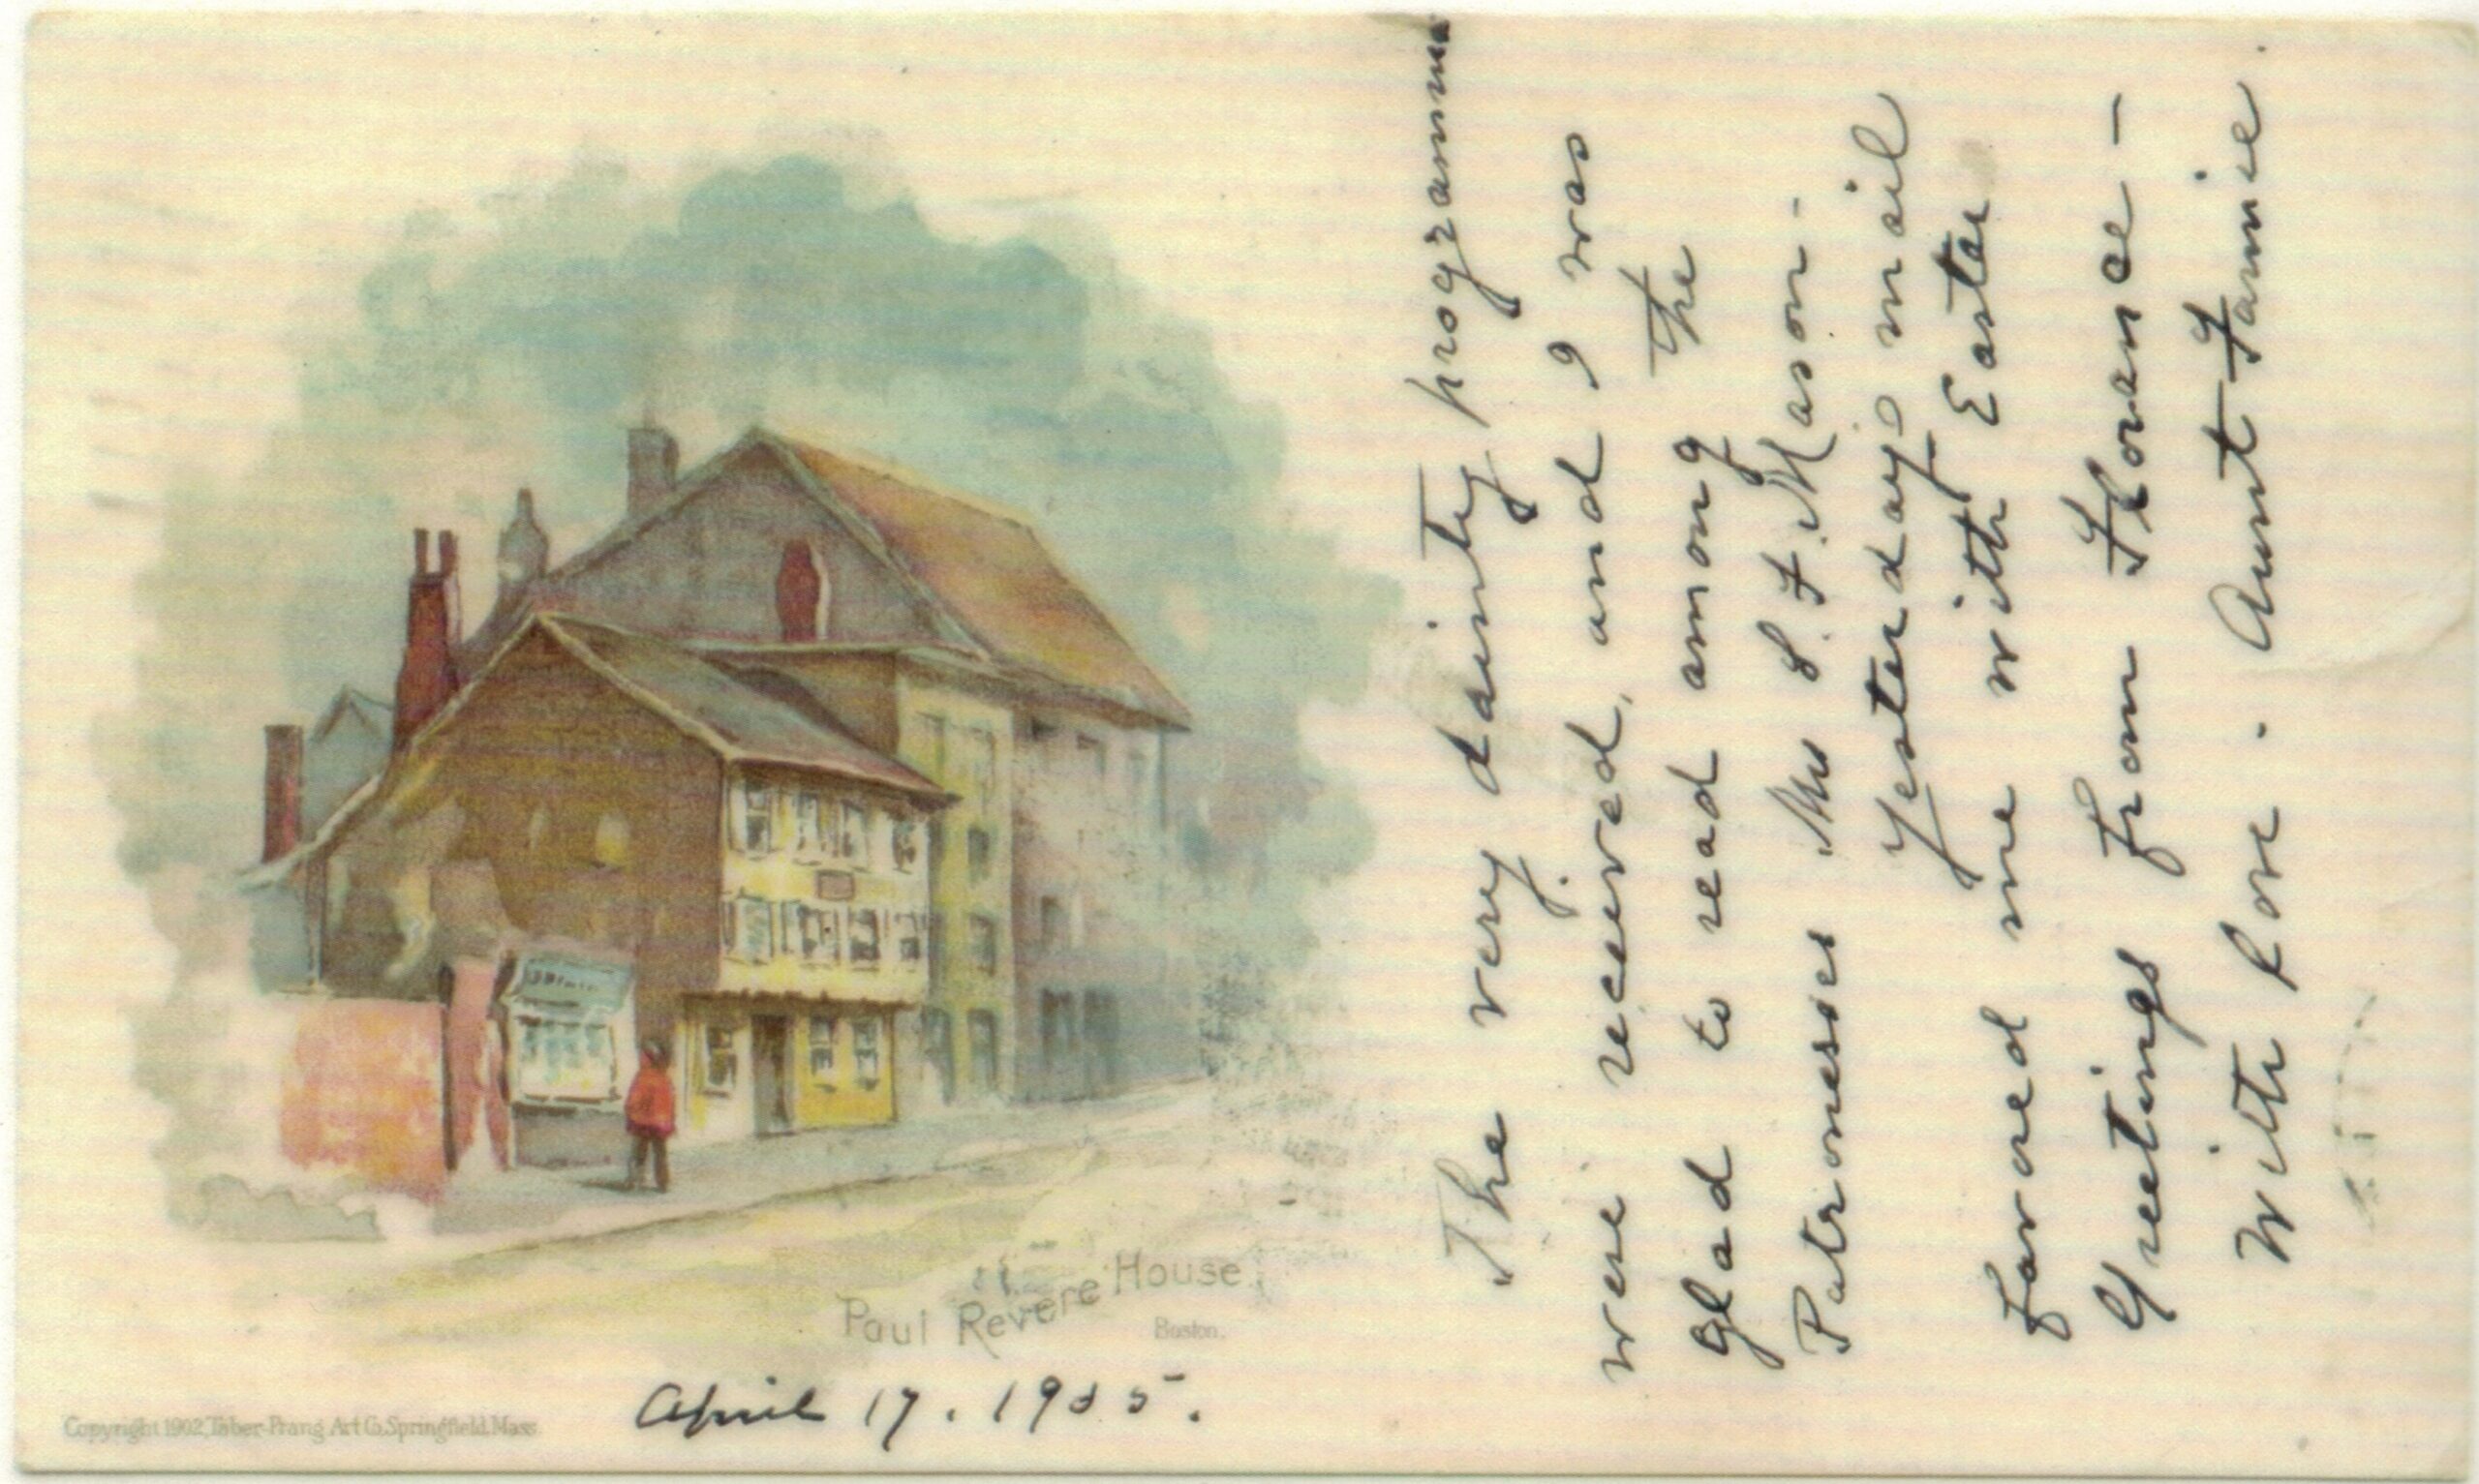 A vintage postcard with a watercolor image of the revere house